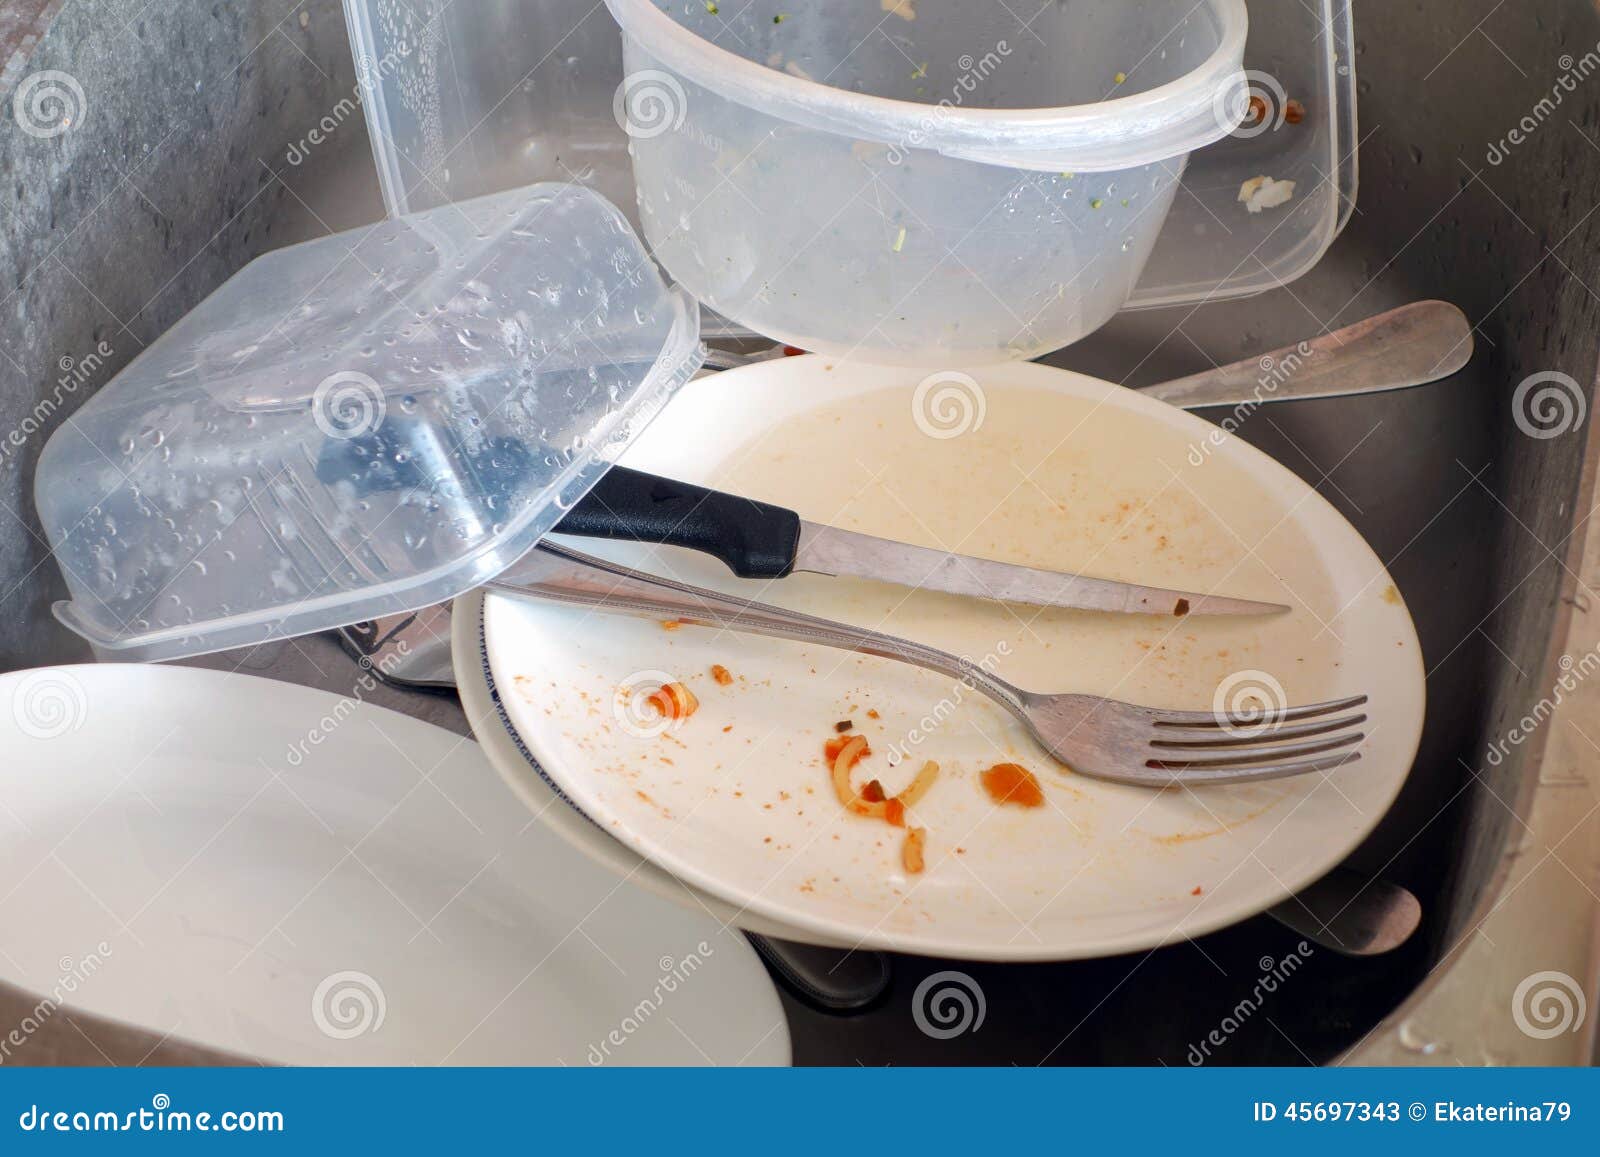 Dirty dishware in kitchen sink